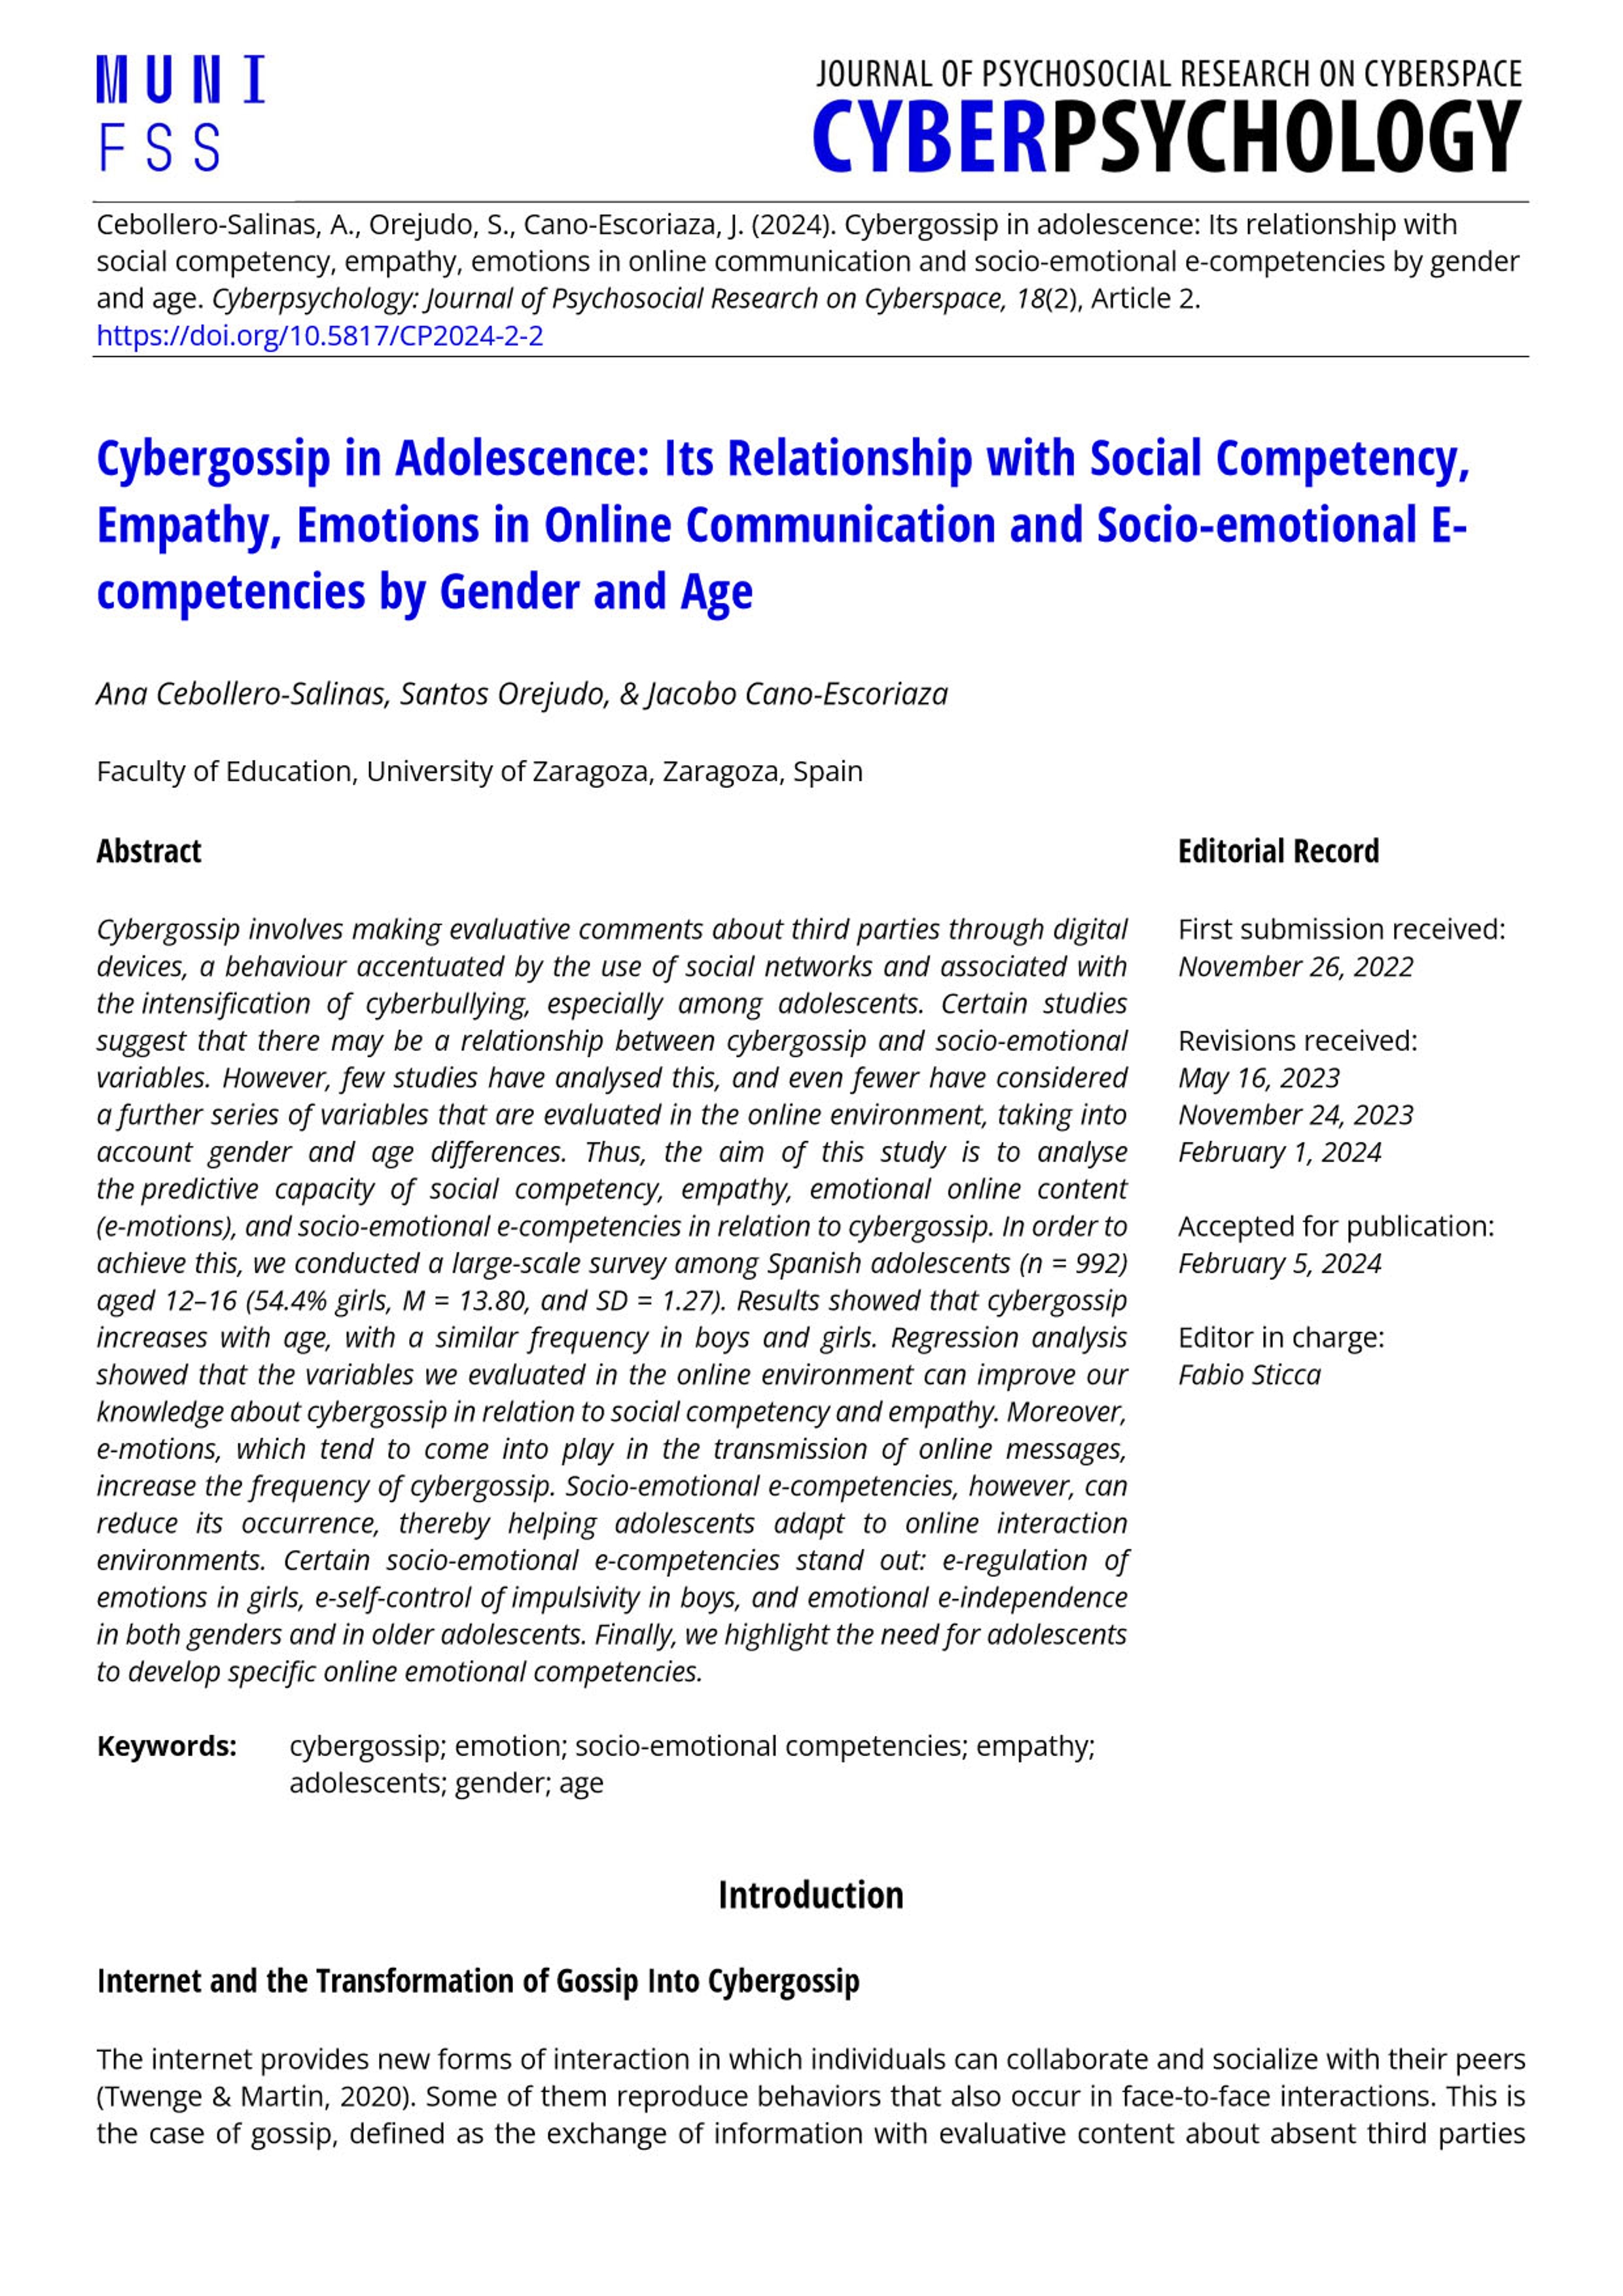 Cybergossip in adolescence: Its relationship with social competency, empathy, emotions in online communication and socio-emotional e-competencies by gender and age